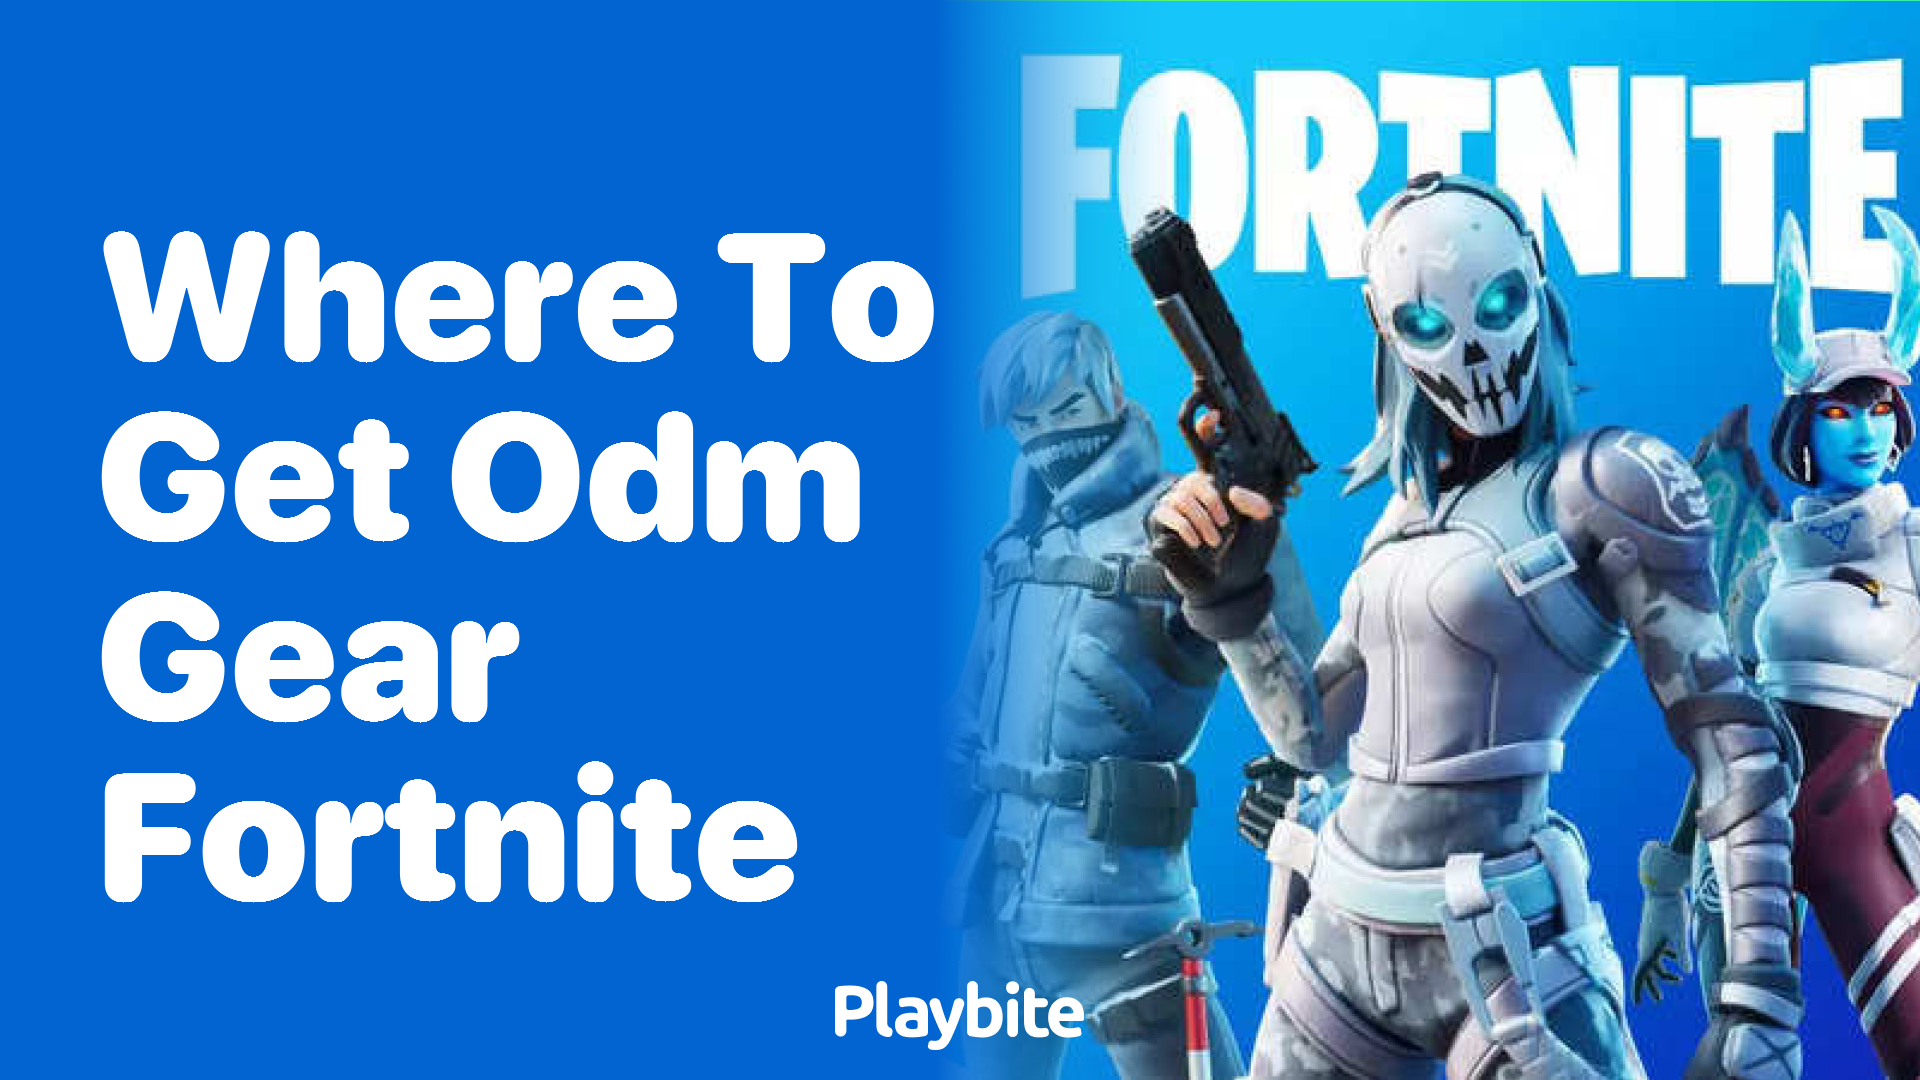 Where to Get ODM Gear in Fortnite